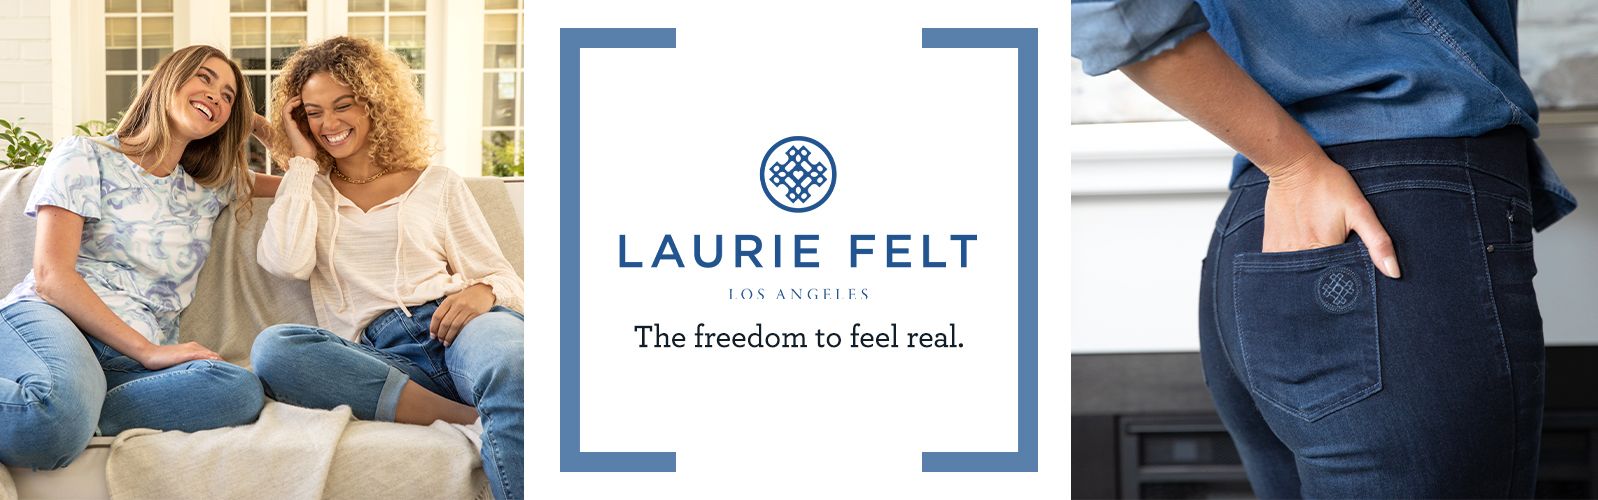 Laurie Felt Los Angeles. The freedom to feel real.